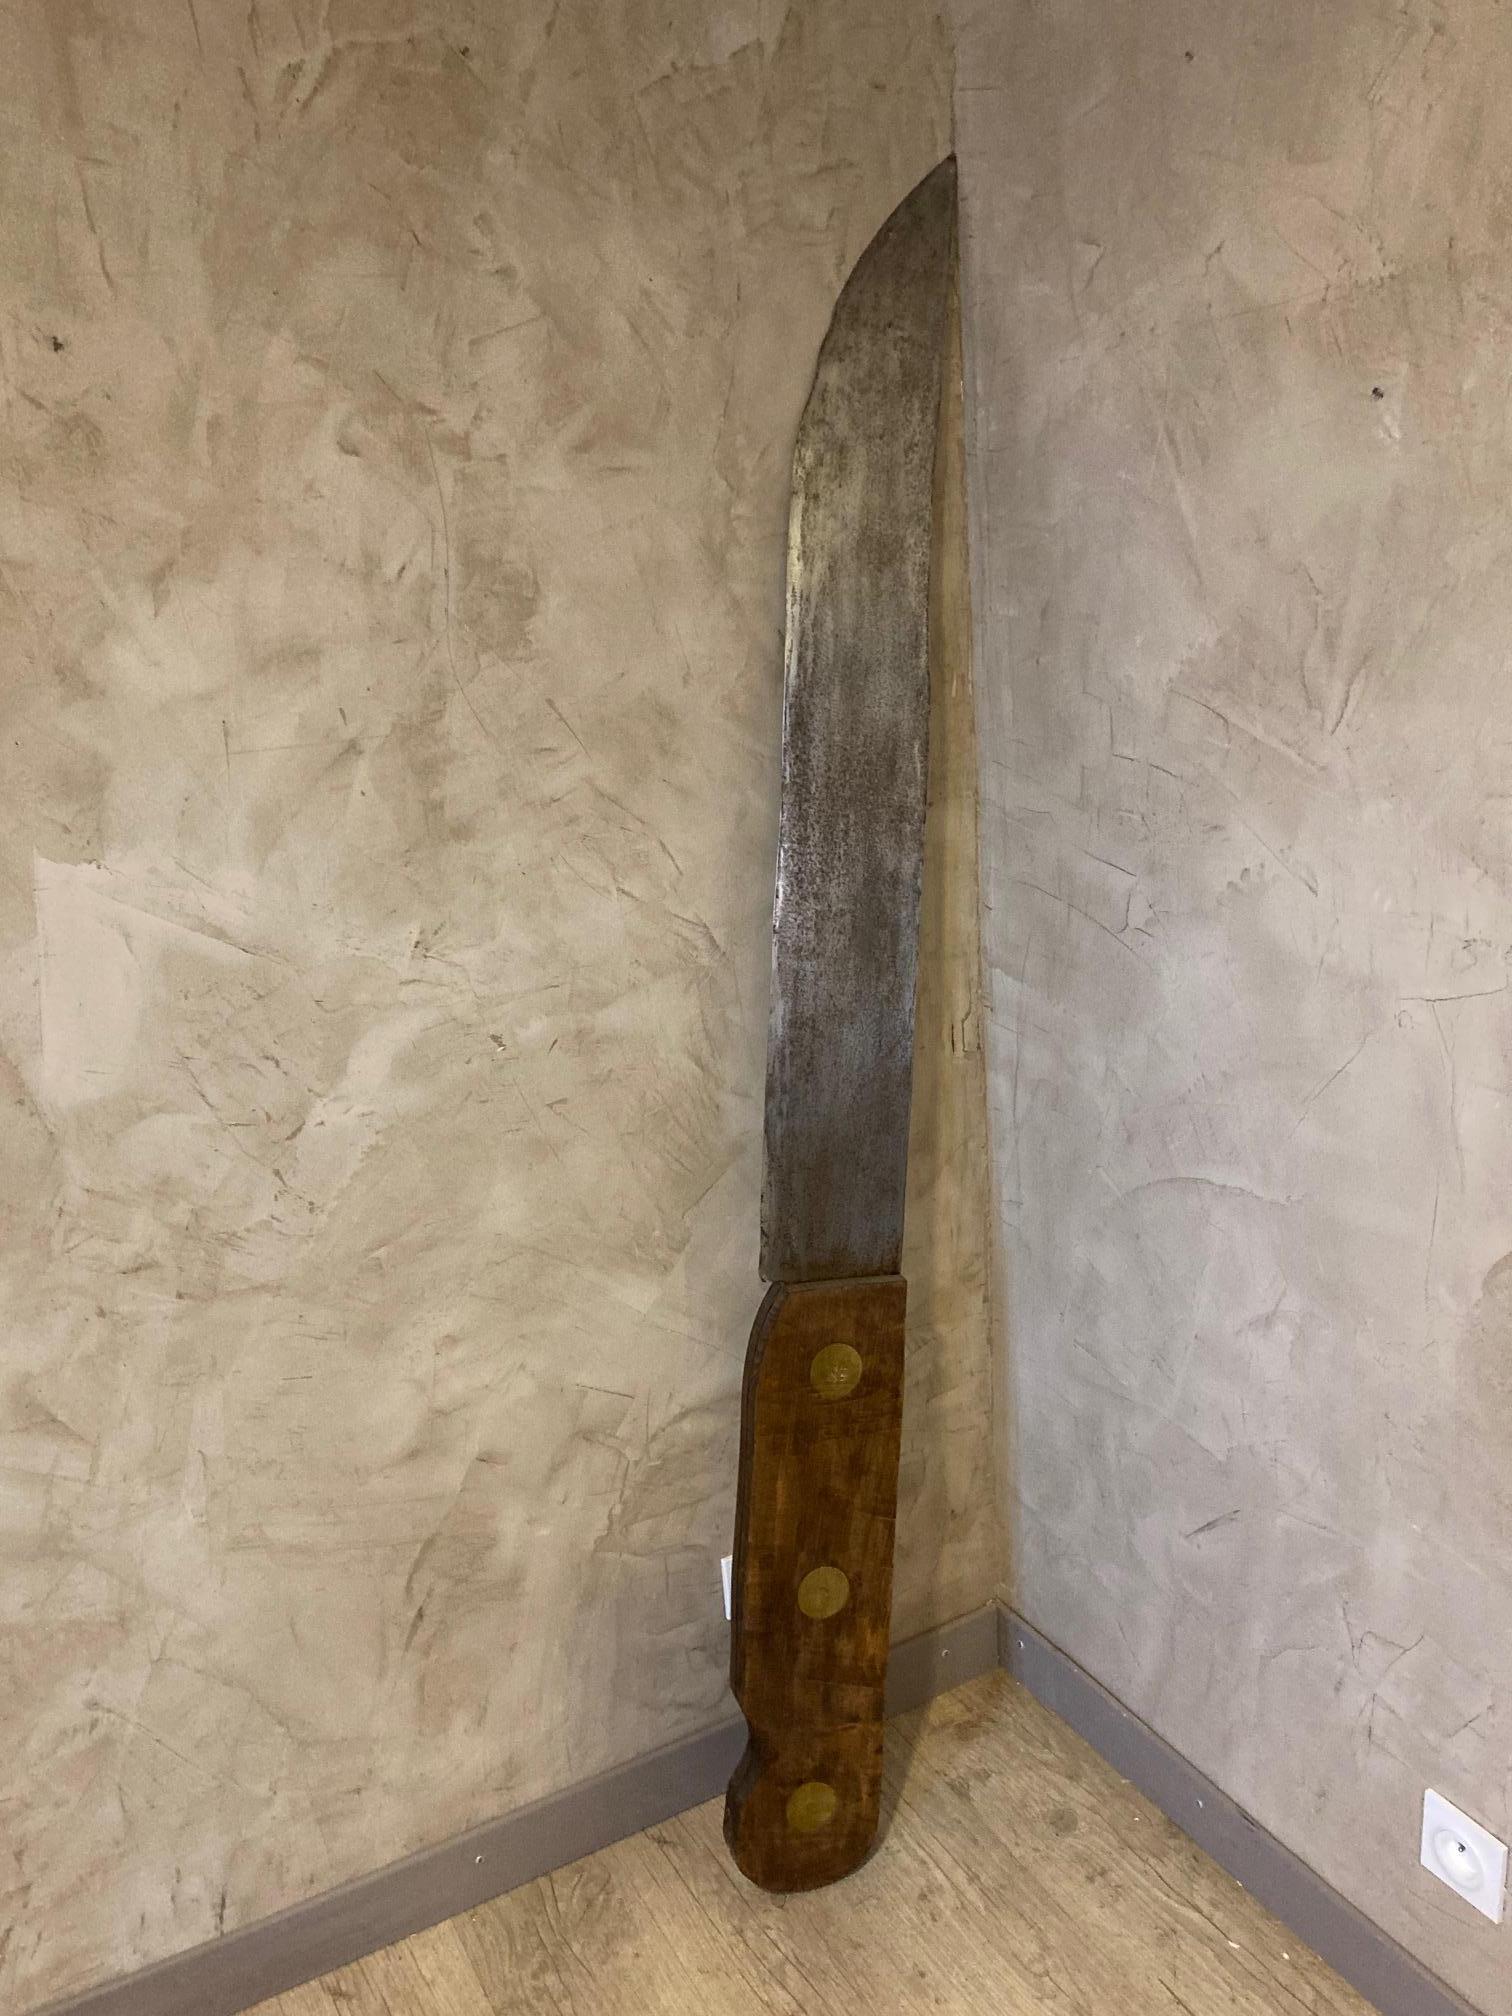 Very rare and original 20th century large metal and wood knife maybe an old cutler signboard. 
The blade is made with metal and the handle is made with wood. Brass nails. 
Good condition and quality.